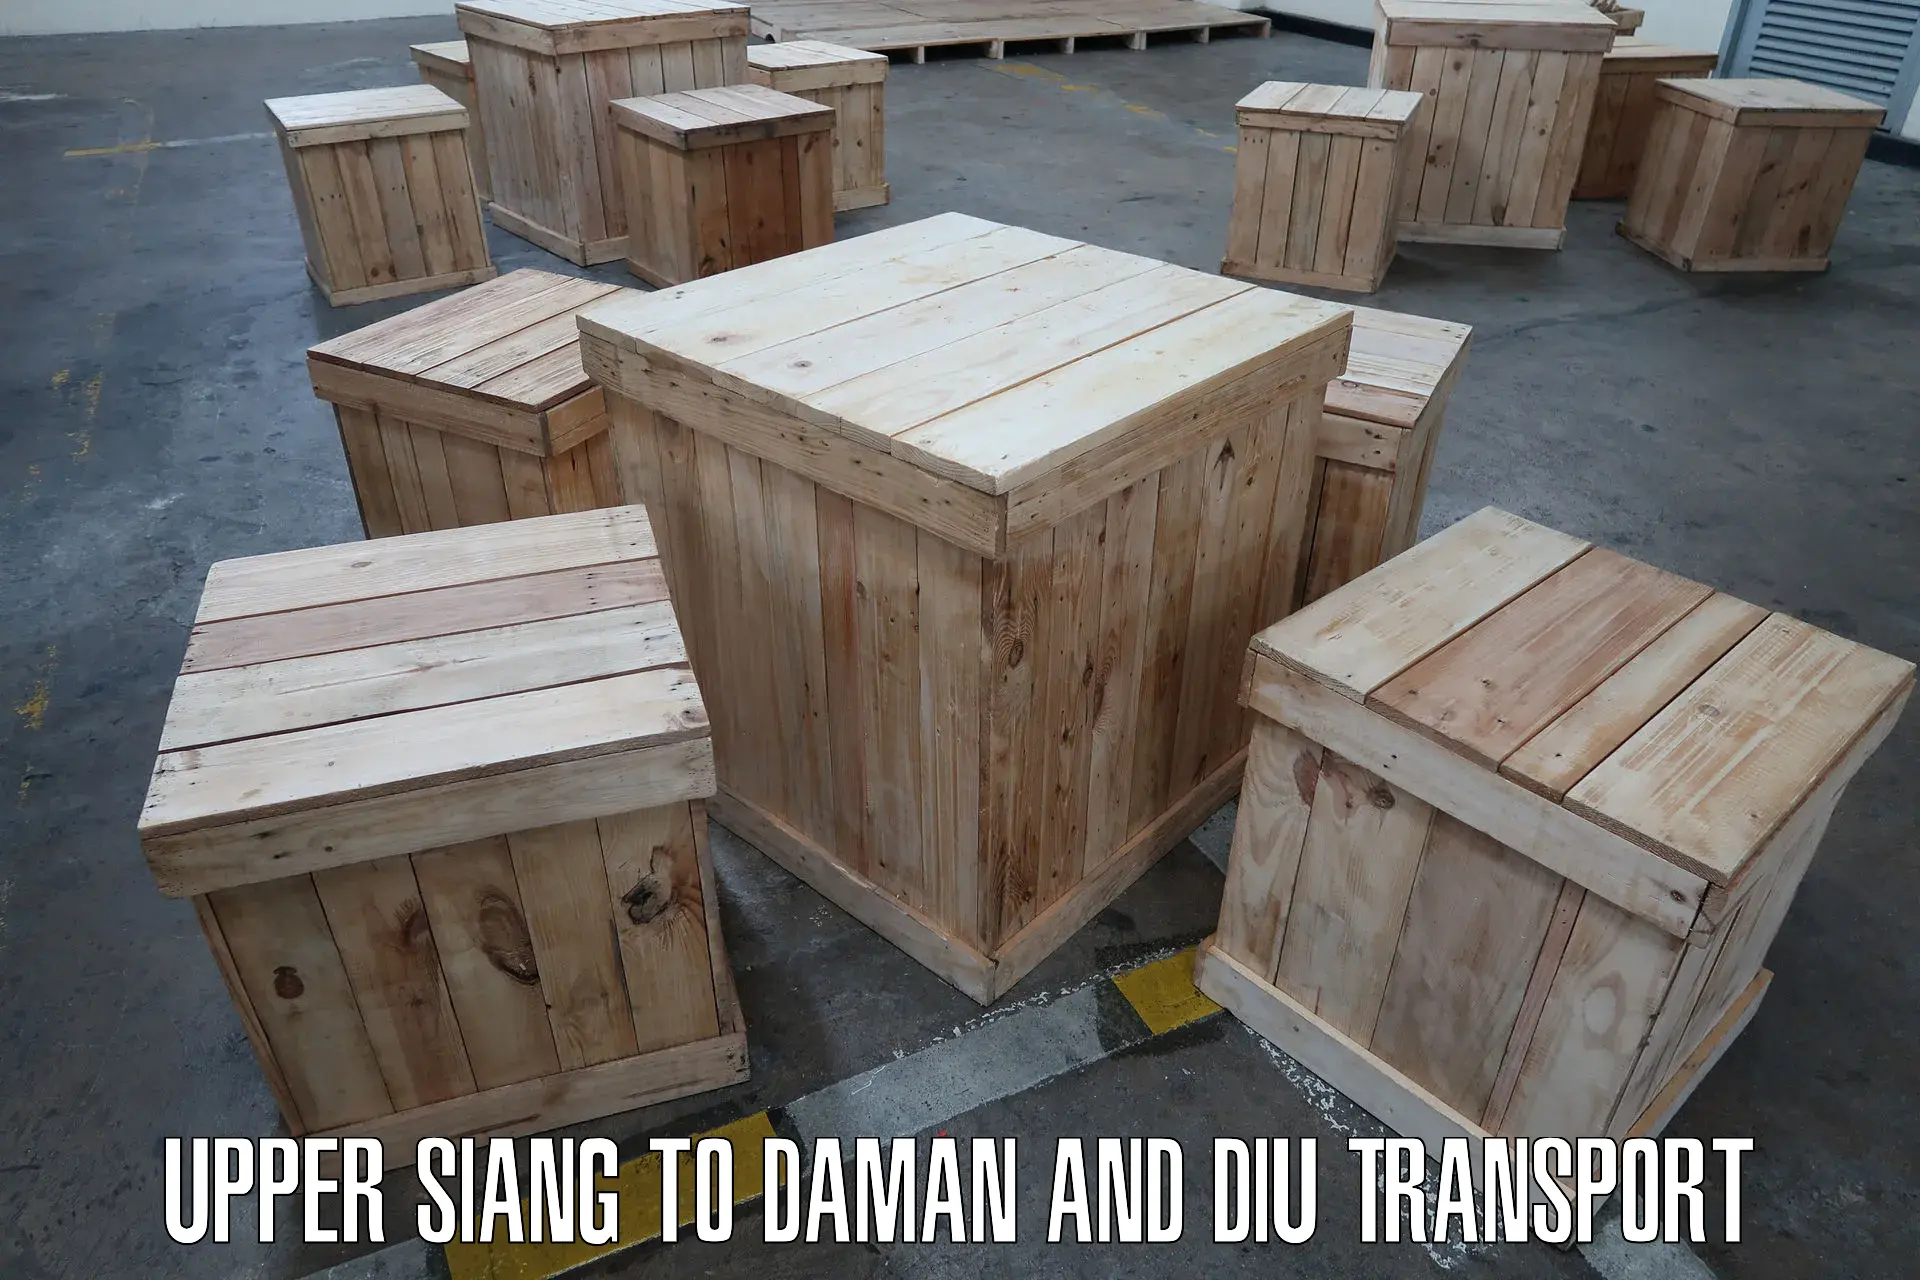 Vehicle transport services Upper Siang to Daman and Diu